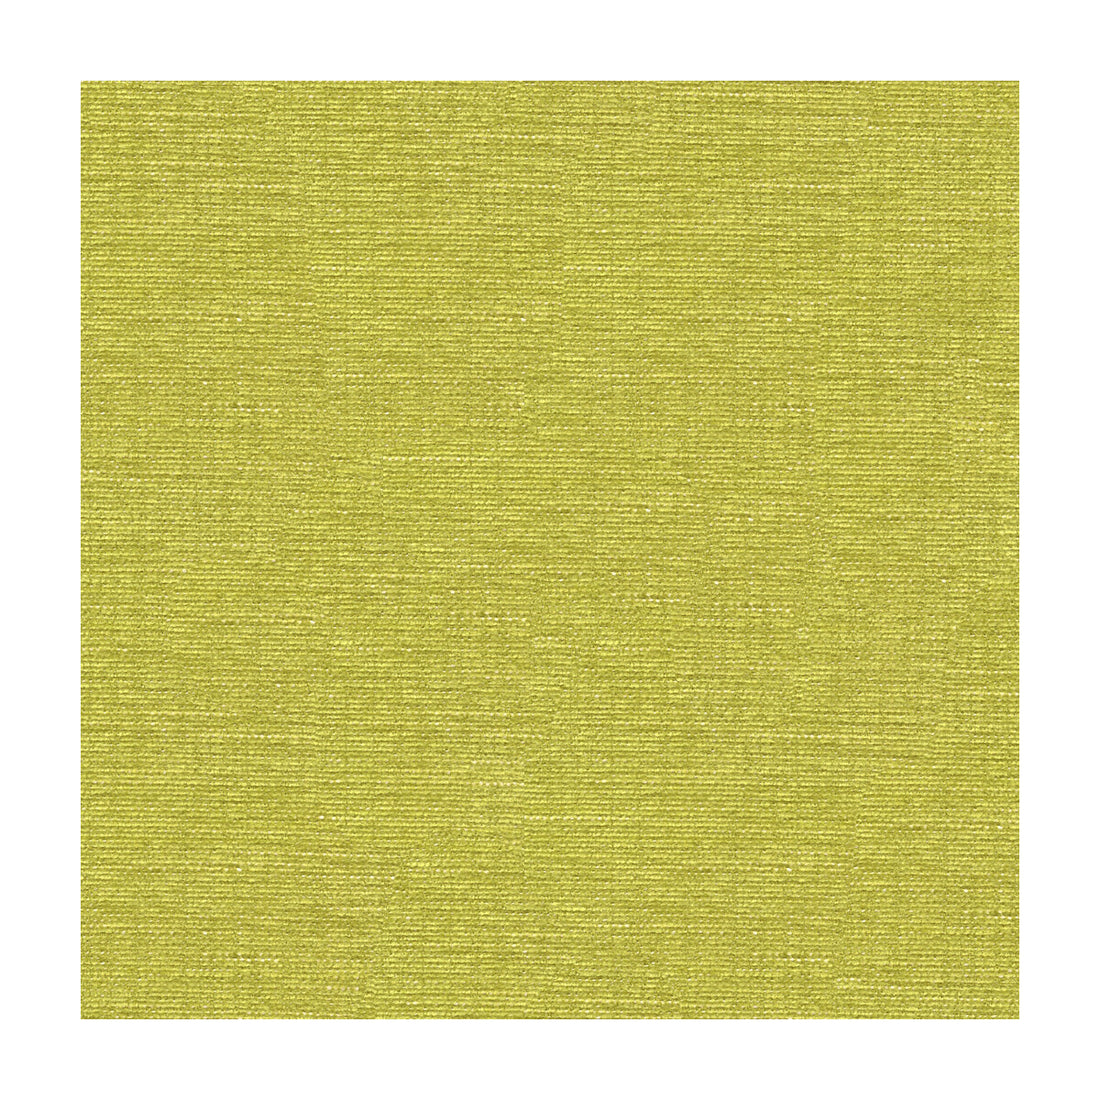 Beacon fabric in lime color - pattern 34182.3.0 - by Kravet Contract in the Crypton Incase collection